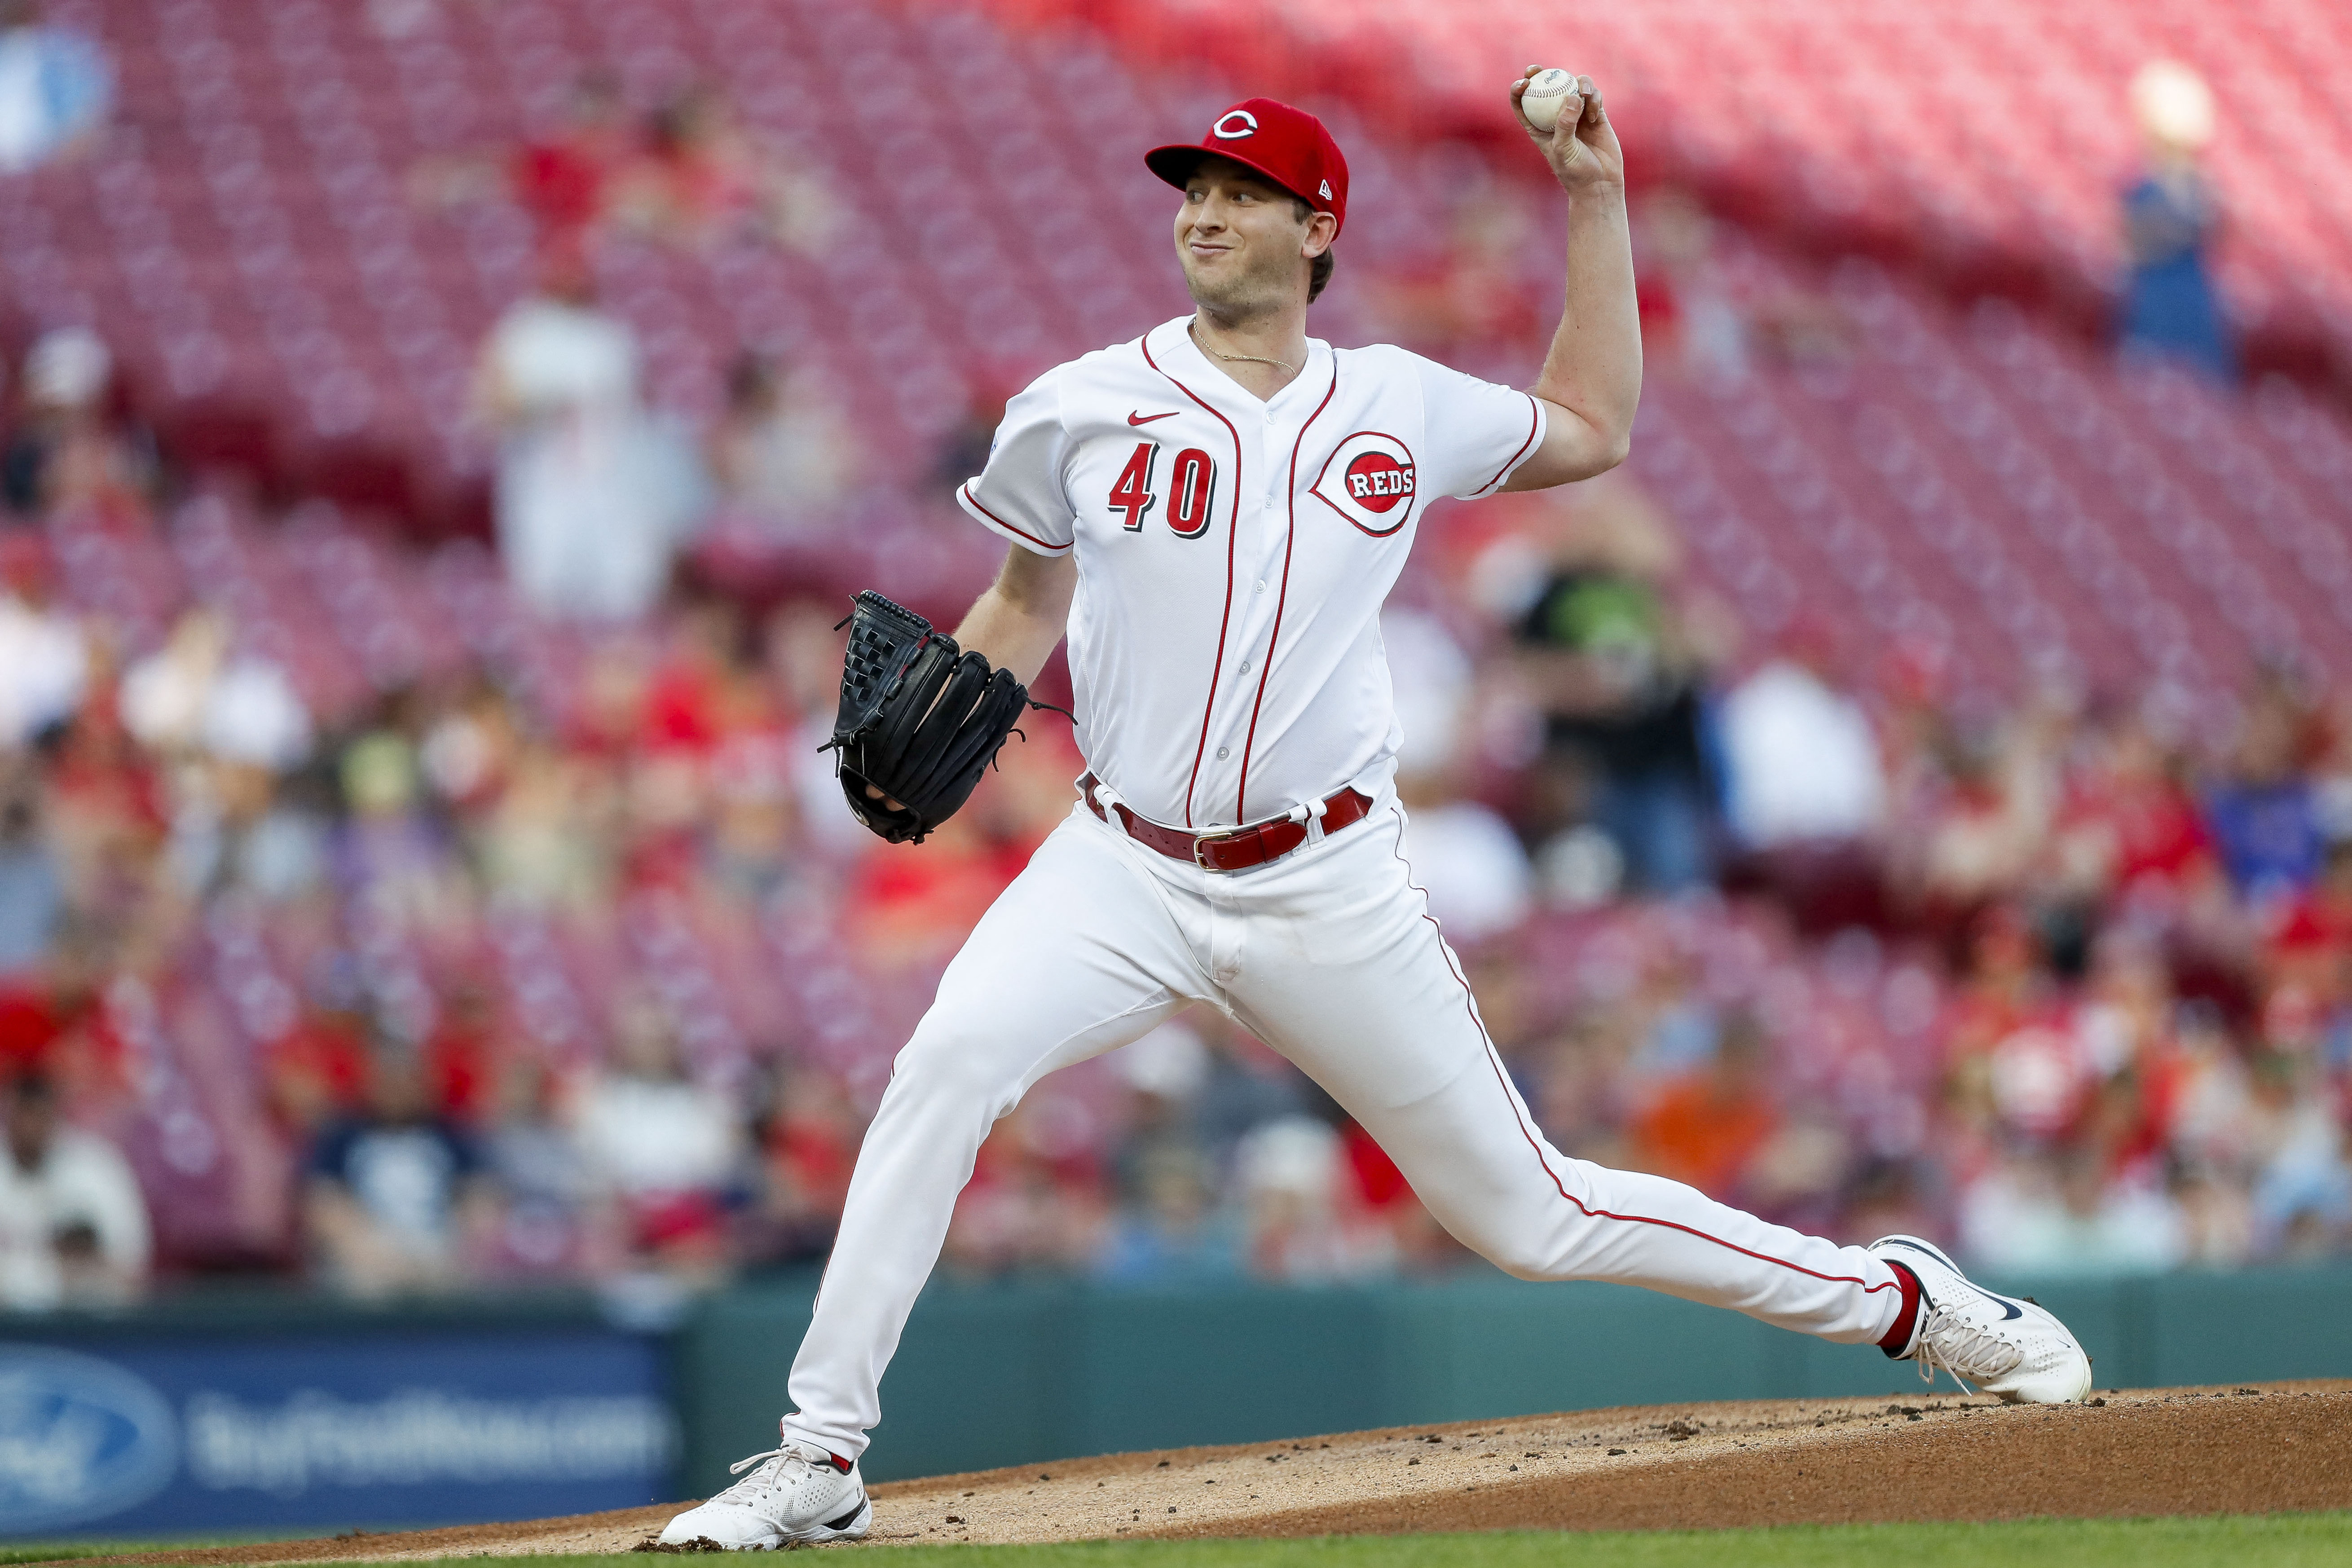 Reds deliver timely hitting to down Phillies